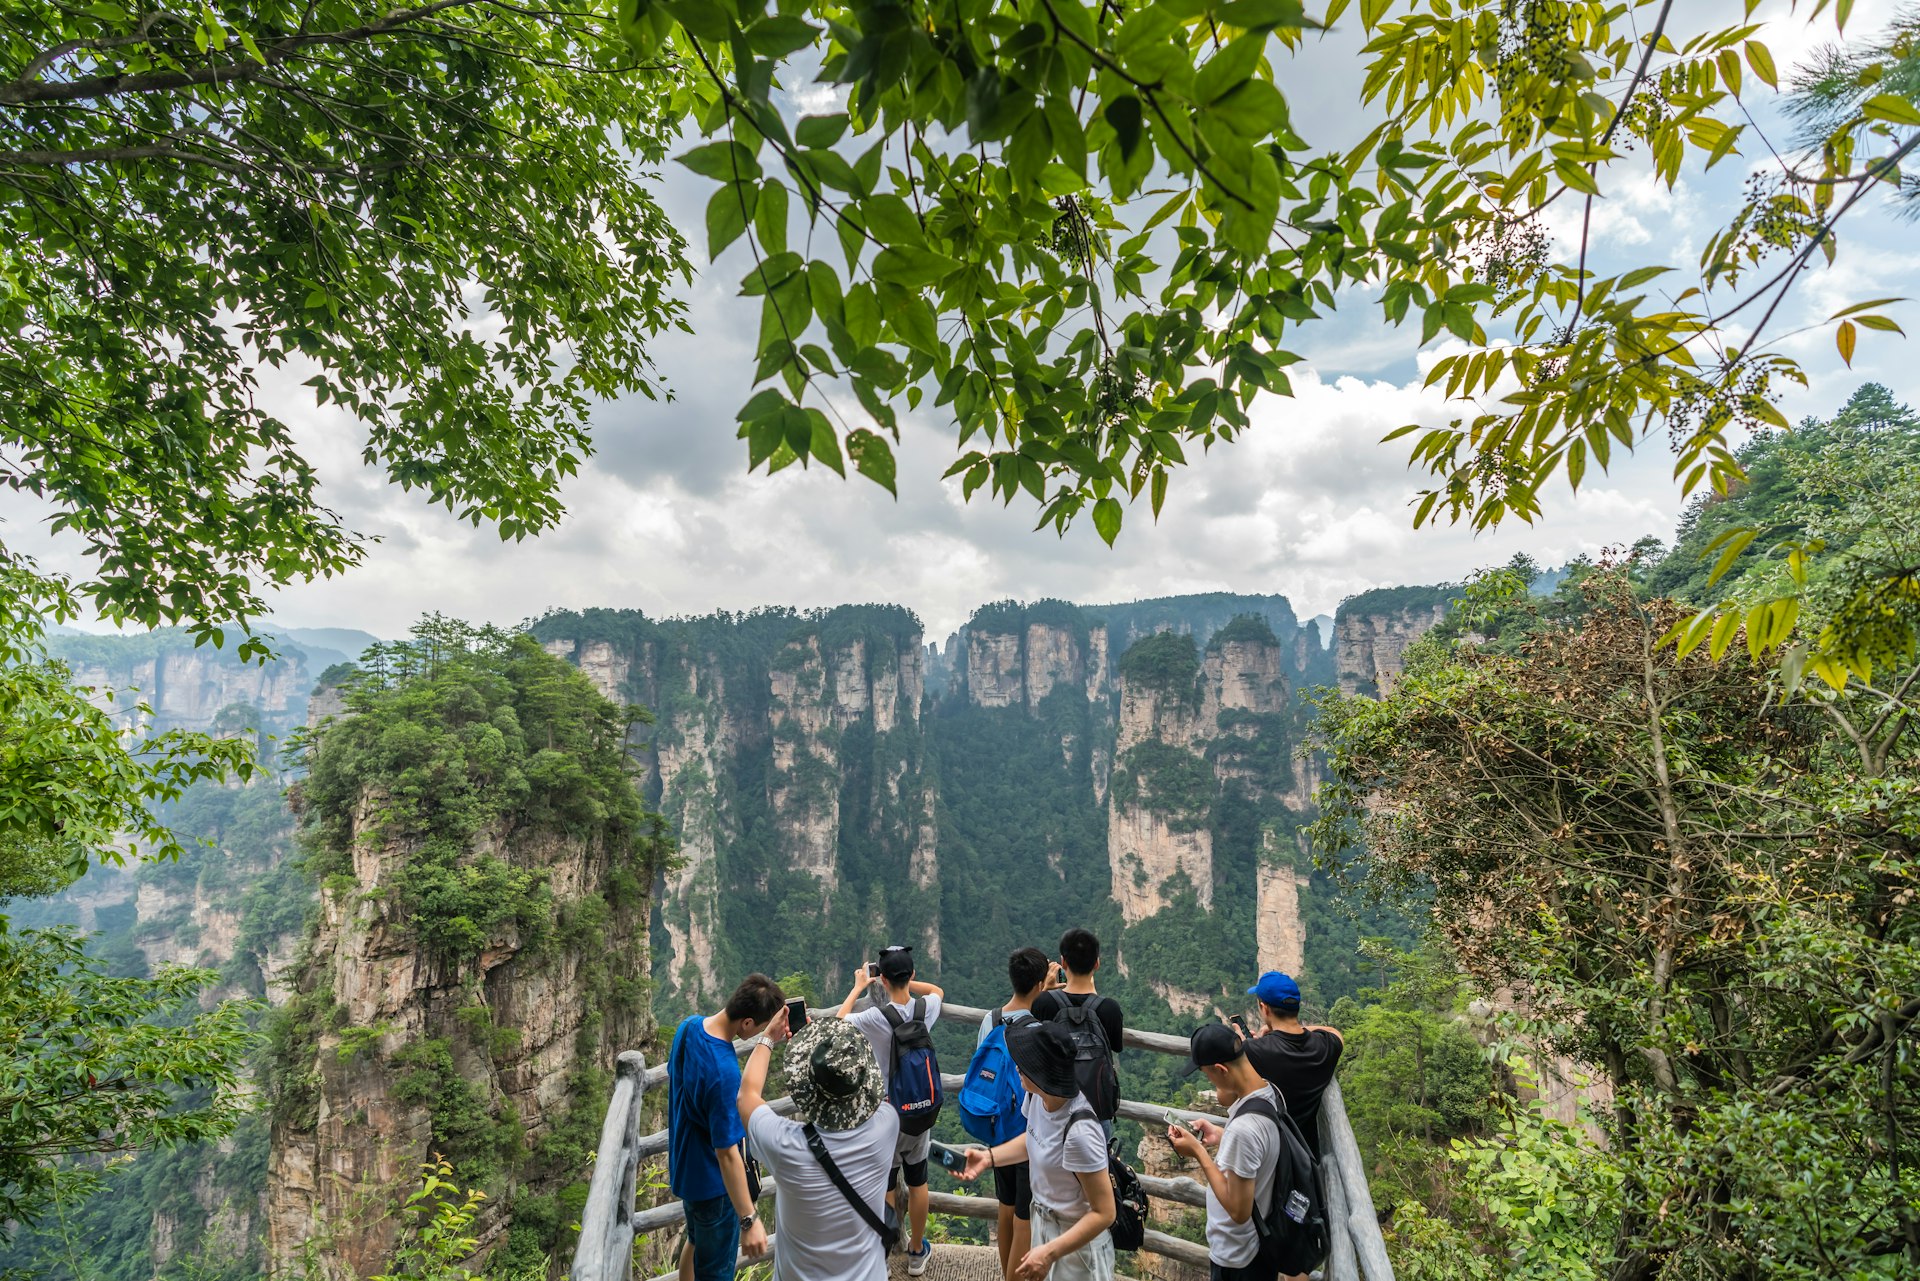 Tourist taking pictures from the viewpoint at Zhangjiajie